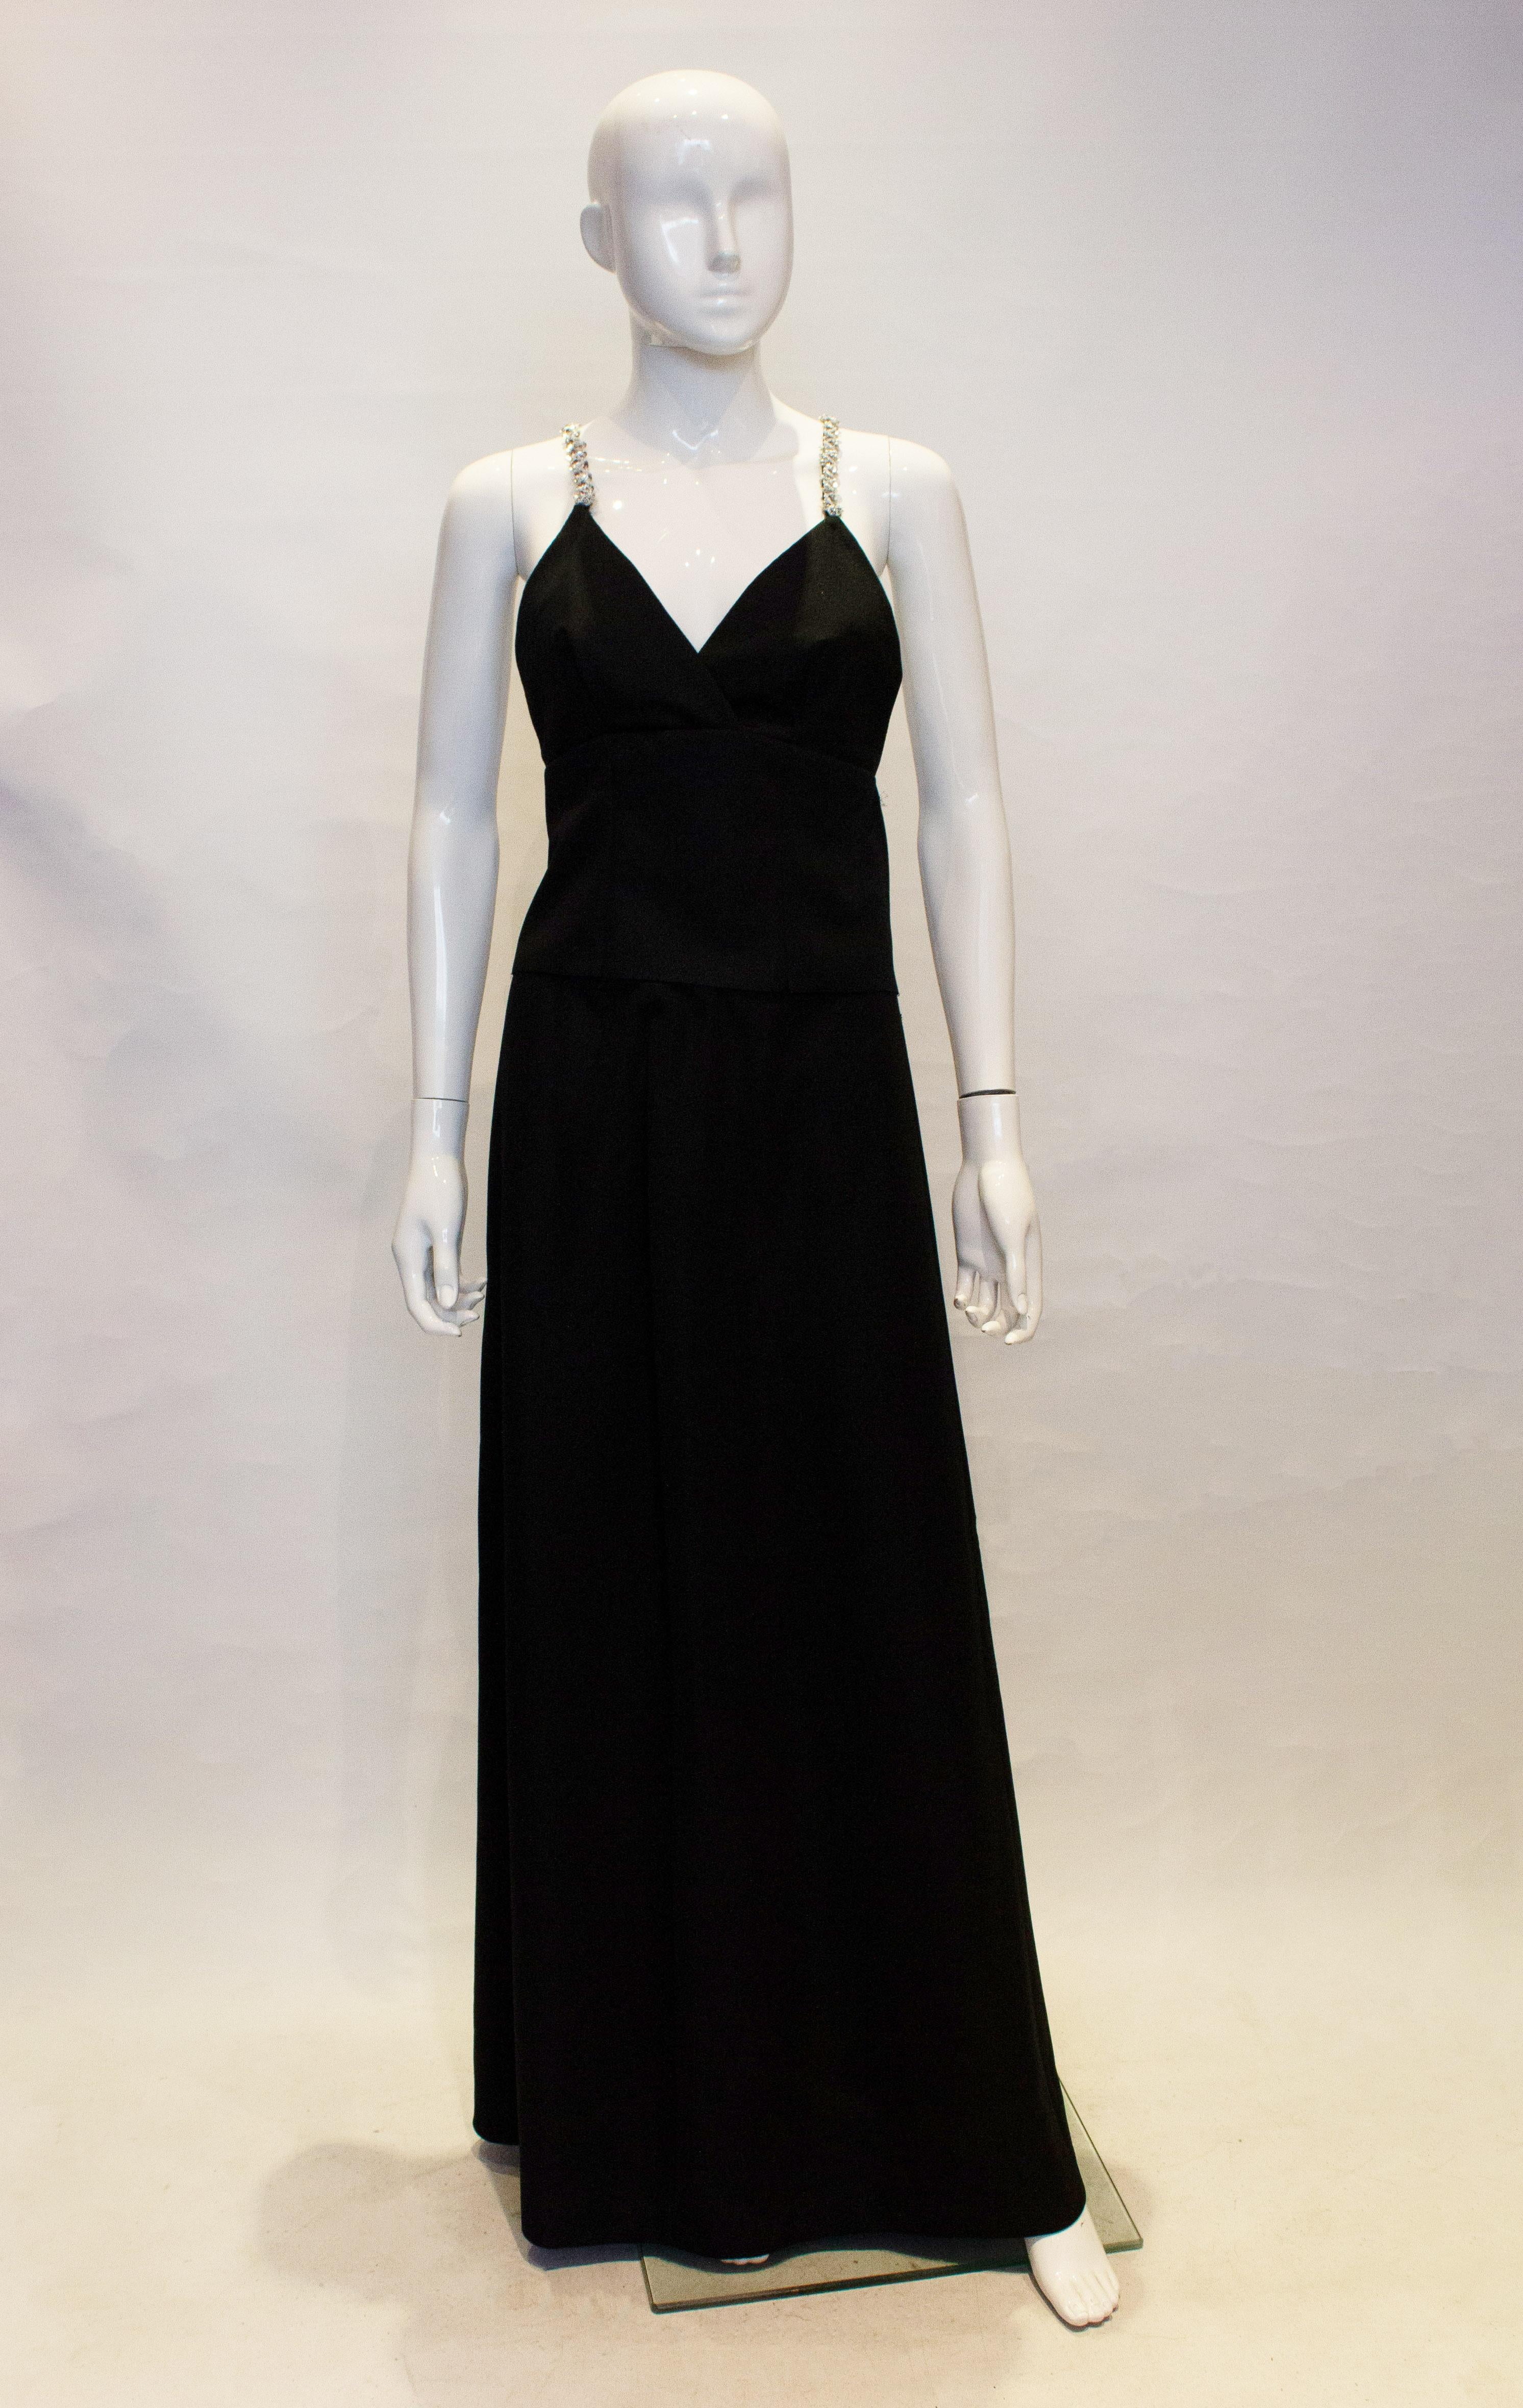 A homemade but headturning two piece from the 1970s. In a black crepe fabric the top has crossover back straps in sequins with a zip fastening. The skirt is A line with a back central zip.
Measurements: Bust 36'', waist 31'' ,length 45''